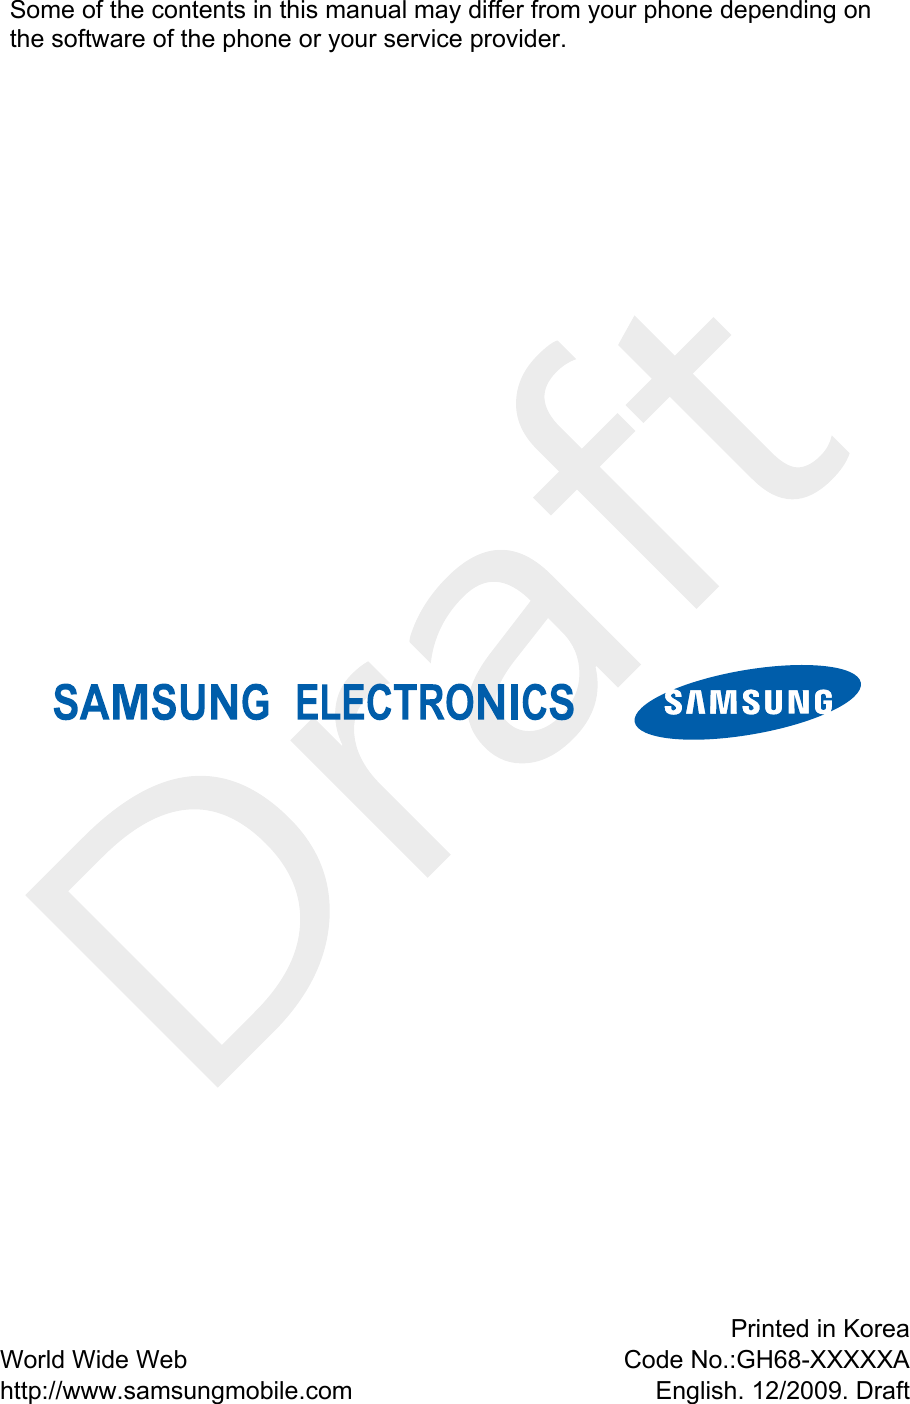    Some of the contents in this manual may differ from your phone depending on the software of the phone or your service provider. World Wide Web http://www.samsungmobile.com Printed in KoreaCode No.:GH68-XXXXXAEnglish. 12/2009. Draft